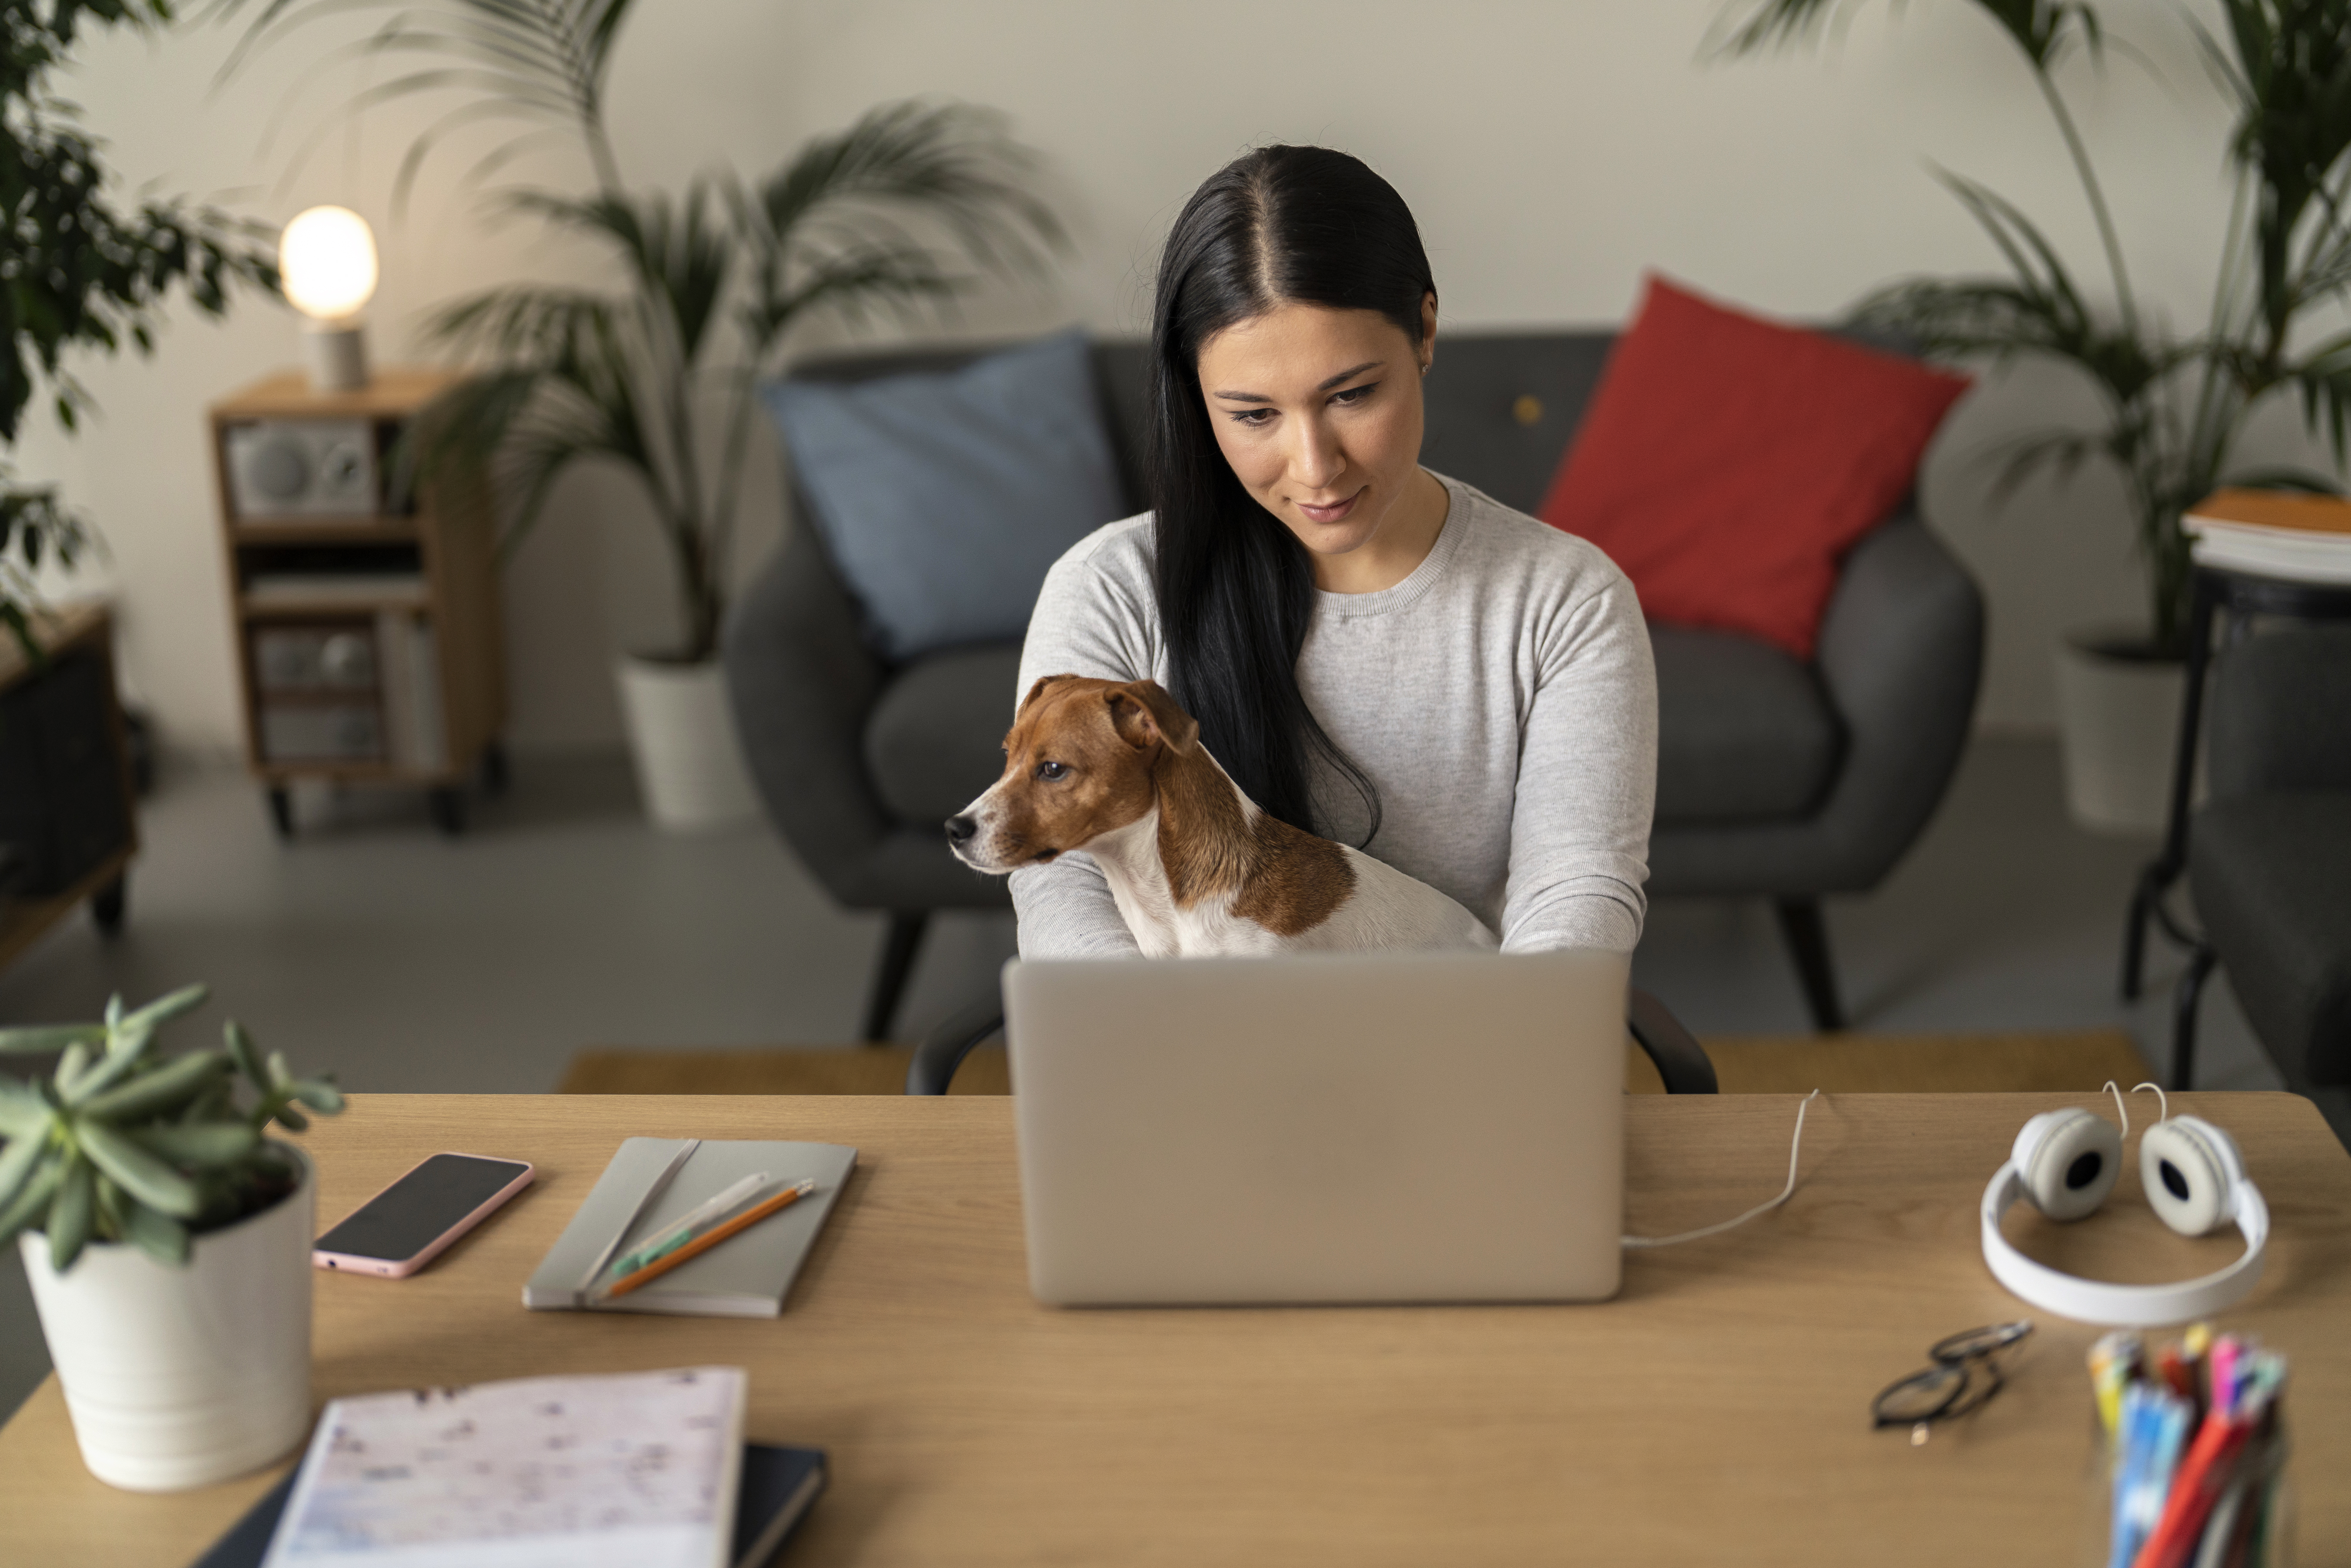 A female college student holds her small dog while attending an online class